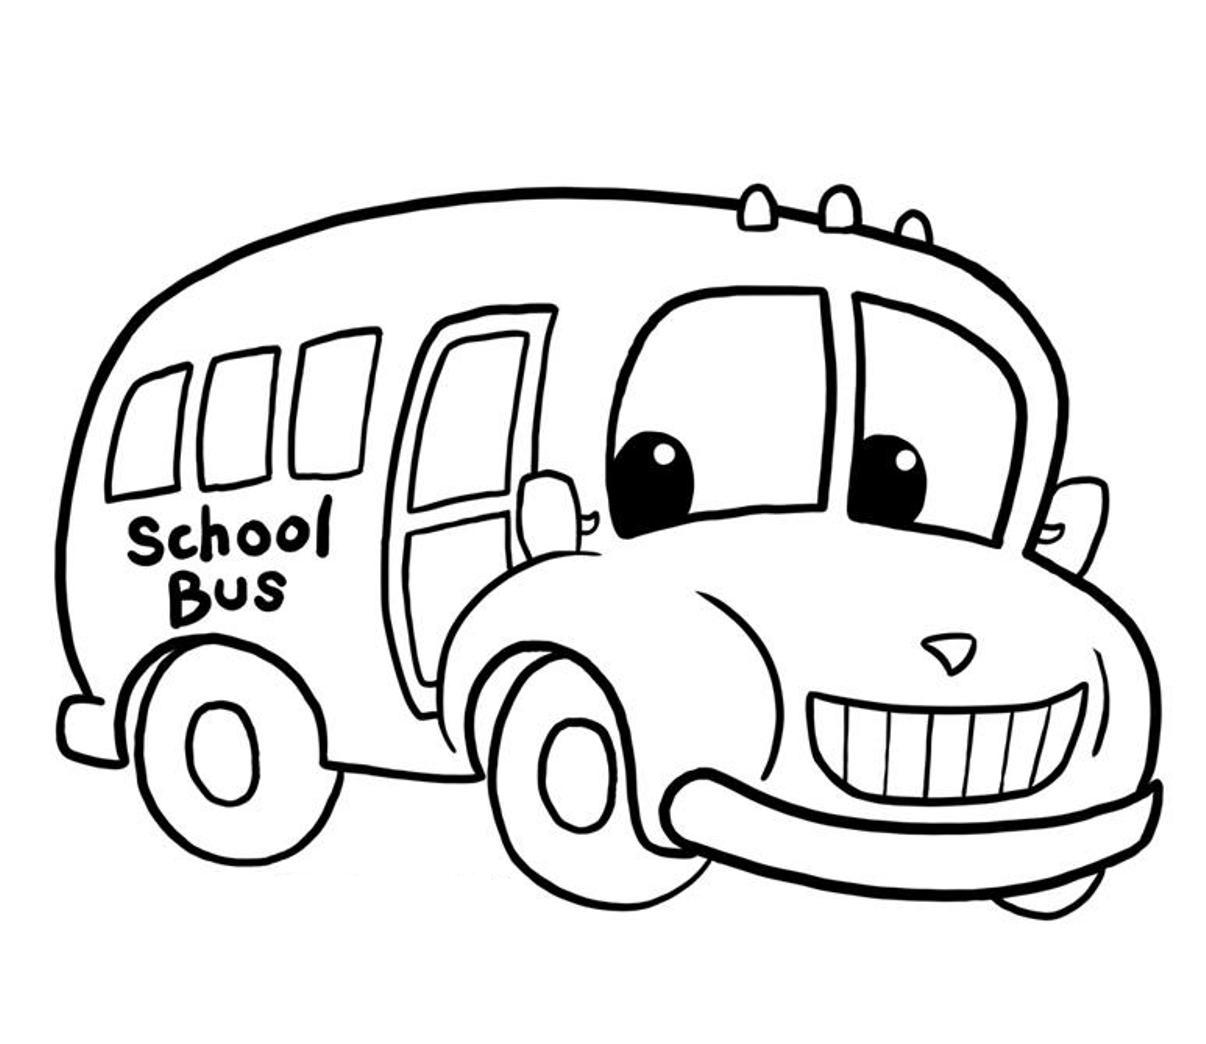 school bus clipart free black and white - photo #11